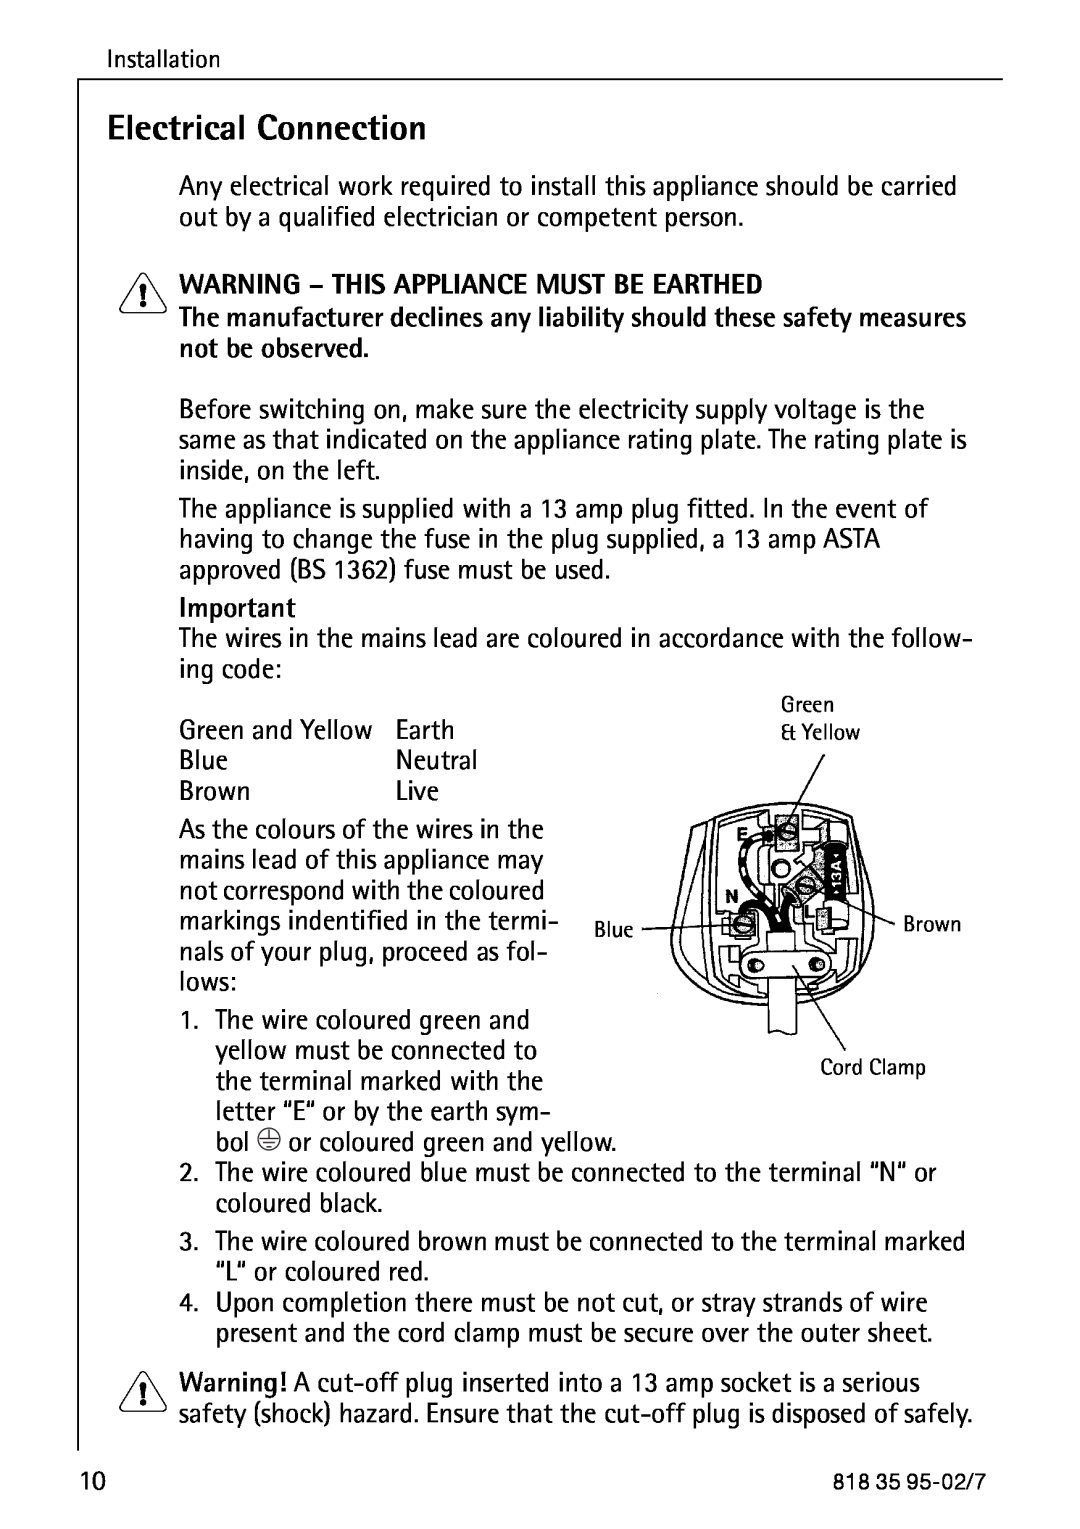 AEG 75248 GA3 manual Electrical Connection, Warning - This Appliance Must Be Earthed 